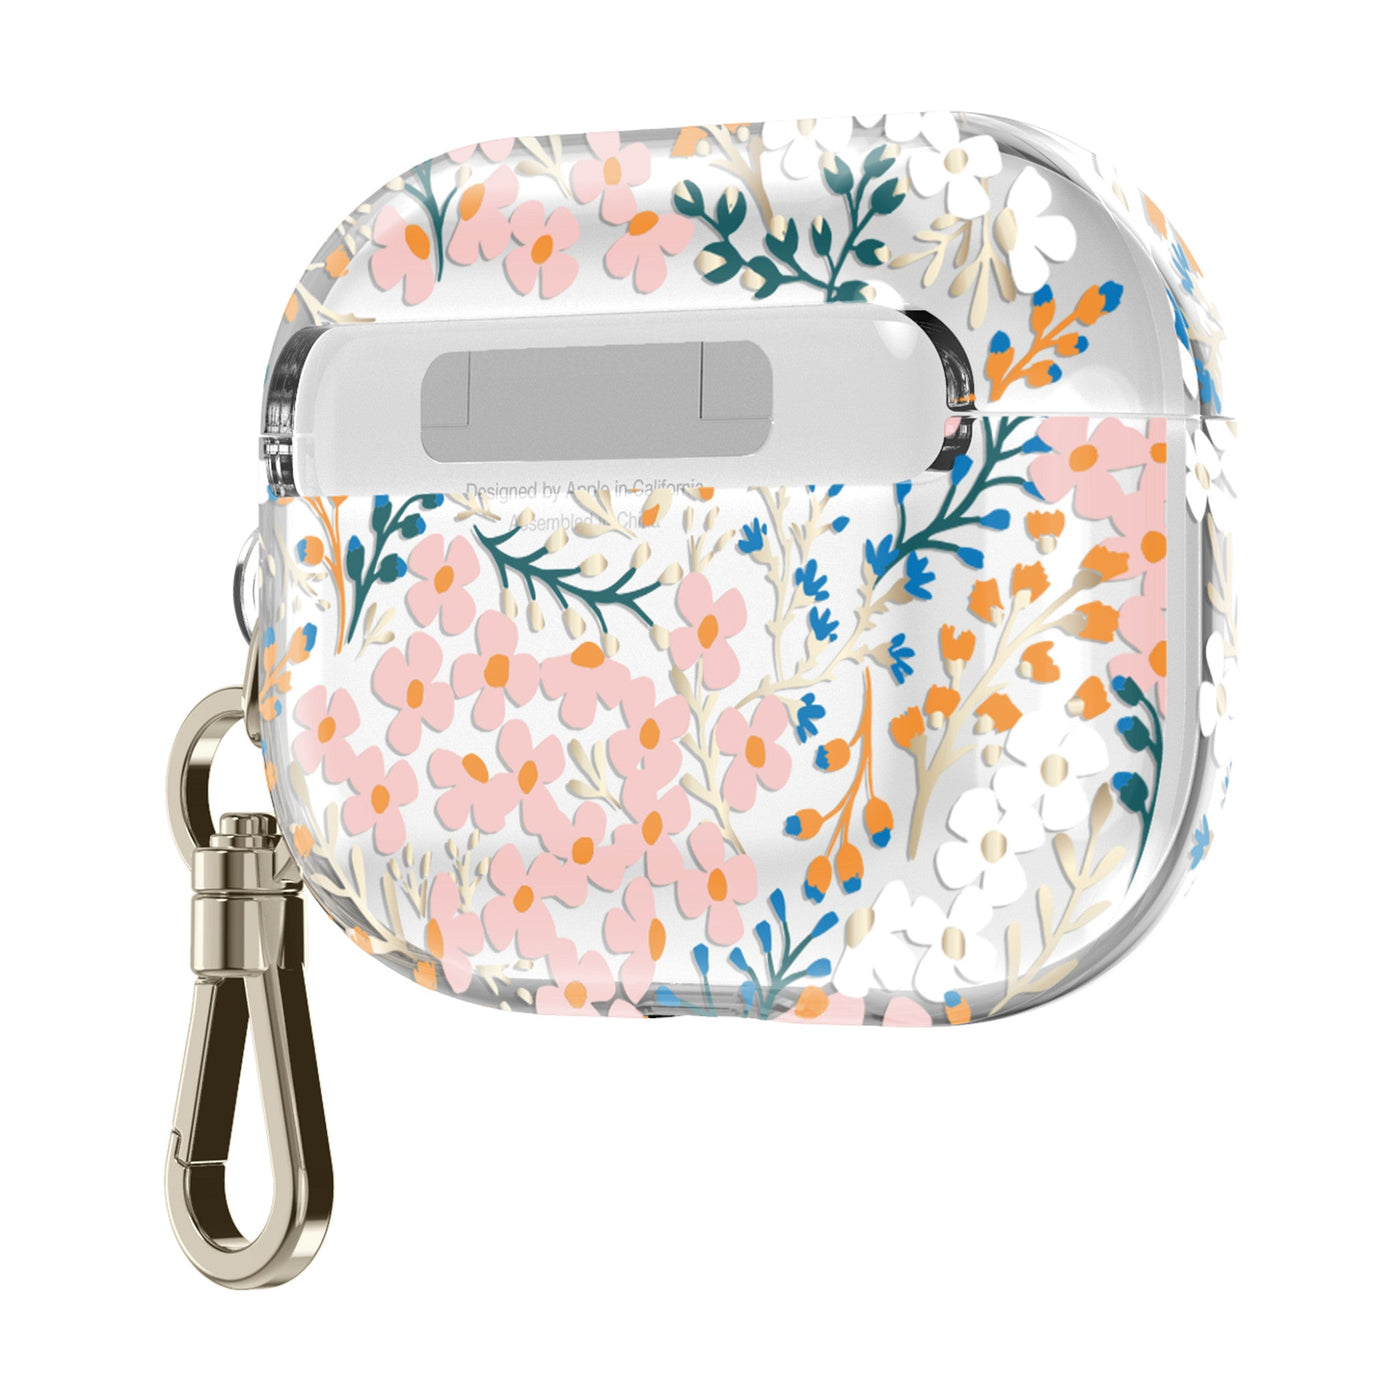 kate spade new york  (ケイト・スペード・ニューヨーク) - Protective AirPods Pro Case for AirPods Pro [ Multi Floral/Rose/Pacific Green/Clear/Gold Foil Logo ]